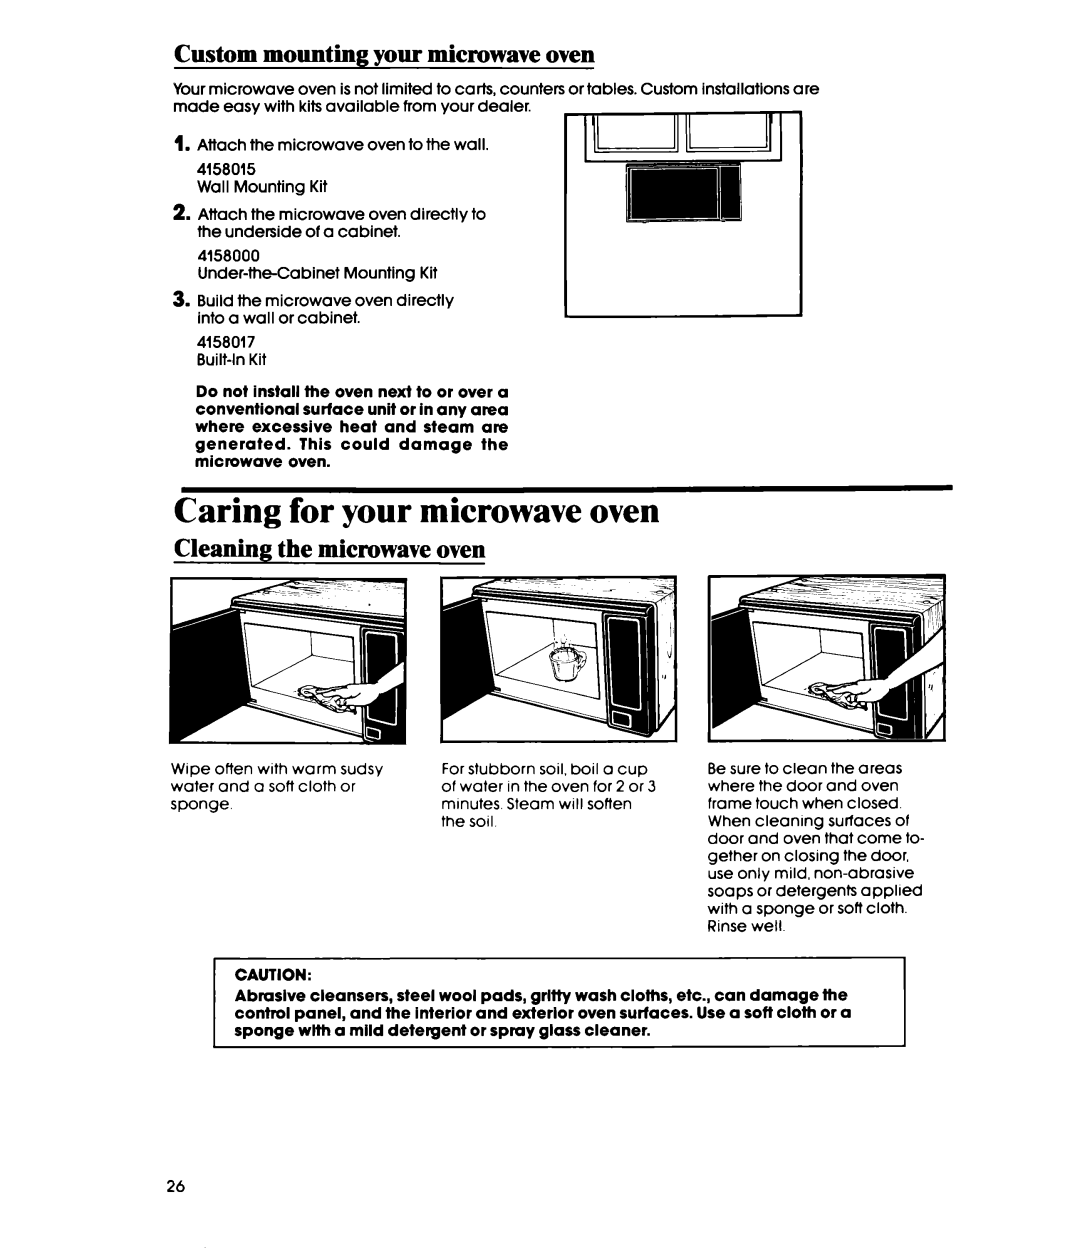 Whirlpool MW36OOXS manual Caring for your microwave oven, Custom mounting vour microwave oven, Cleaning the microwave oven 